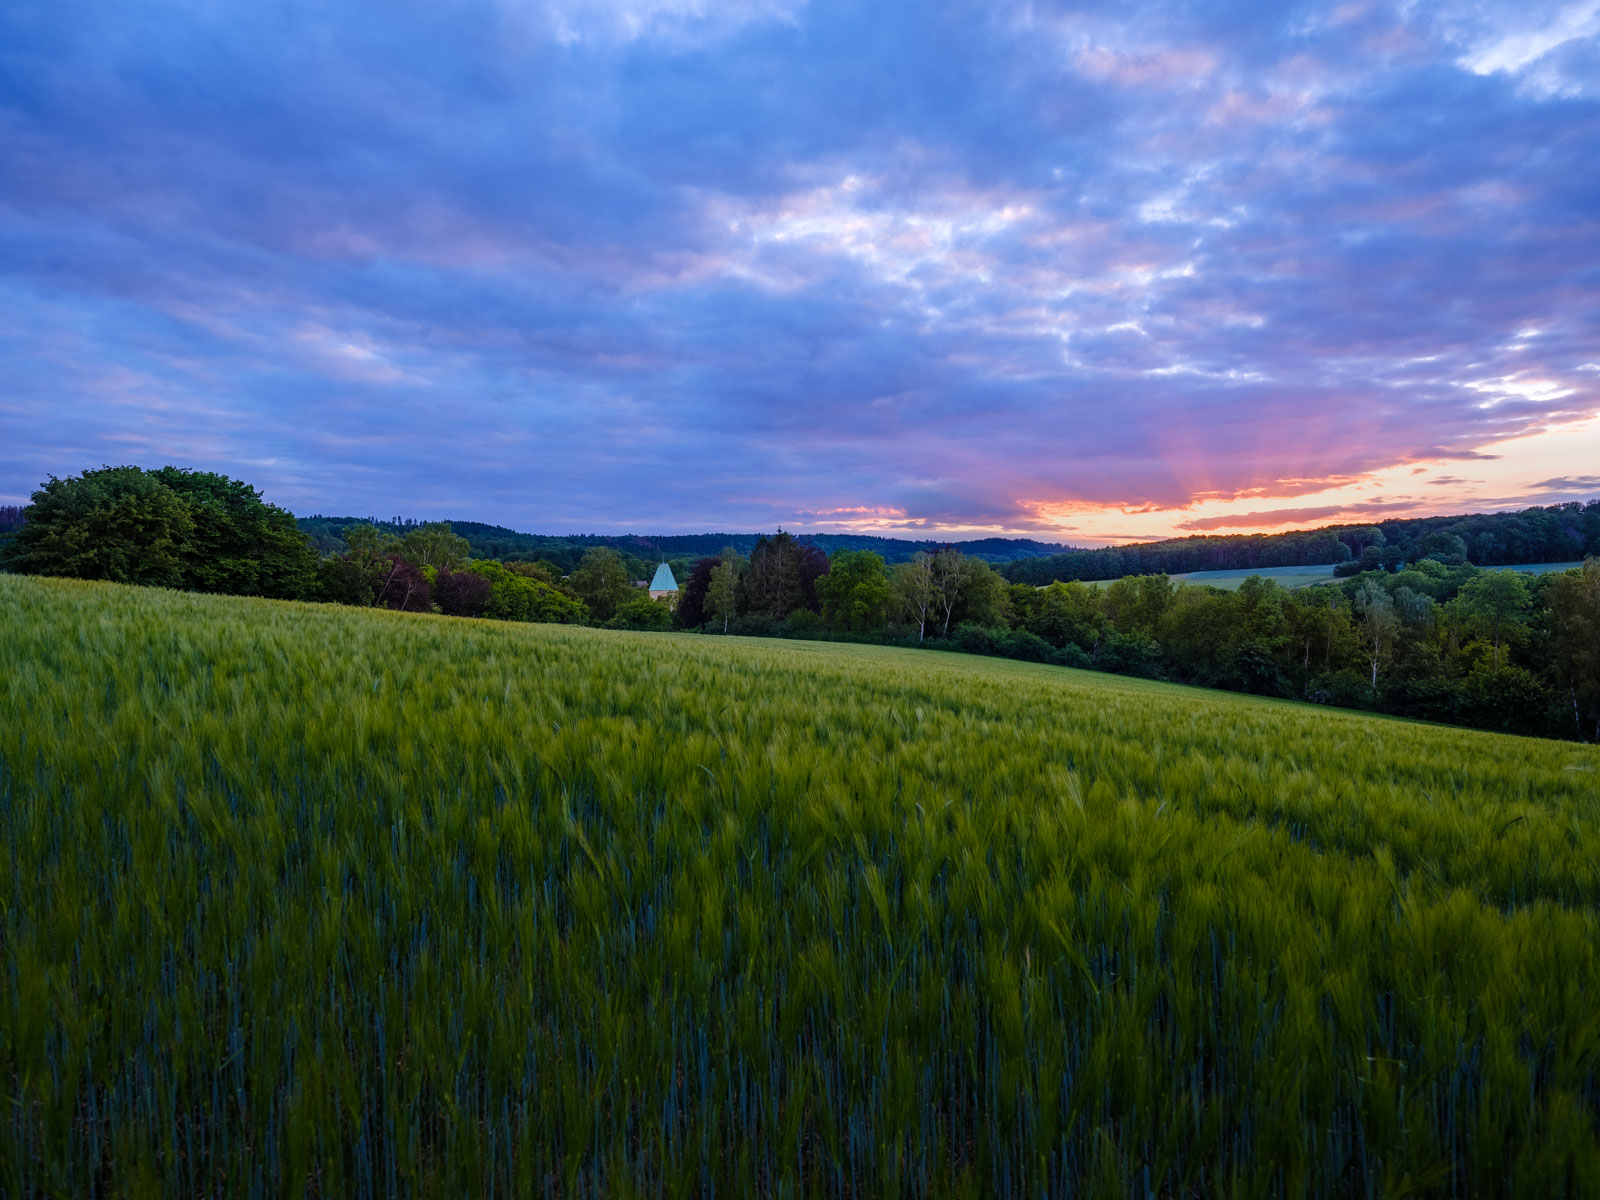 Spring evening in the fields at 'Kirchdornberg' in May 2020 (Bielefeld, Germany).